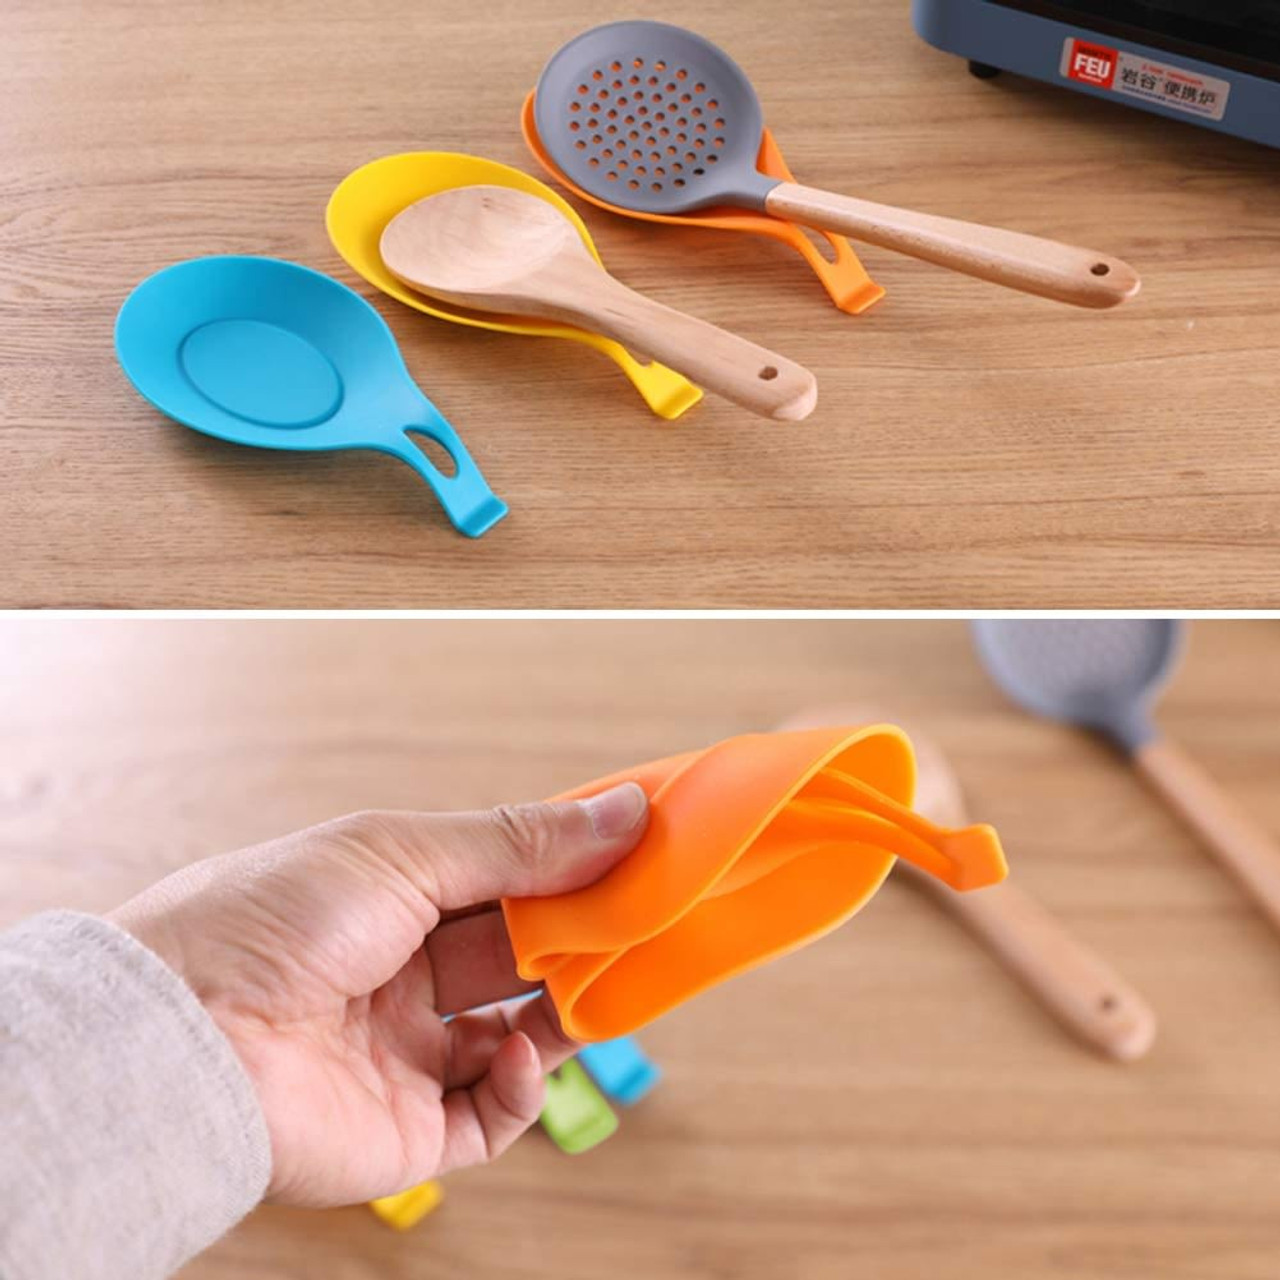 https://cdn11.bigcommerce.com/s-veqacththm/images/stencil/1280x1280/products/6342/16170/Silicone-Spoon-Rest__88486.1699390365.jpg?c=1